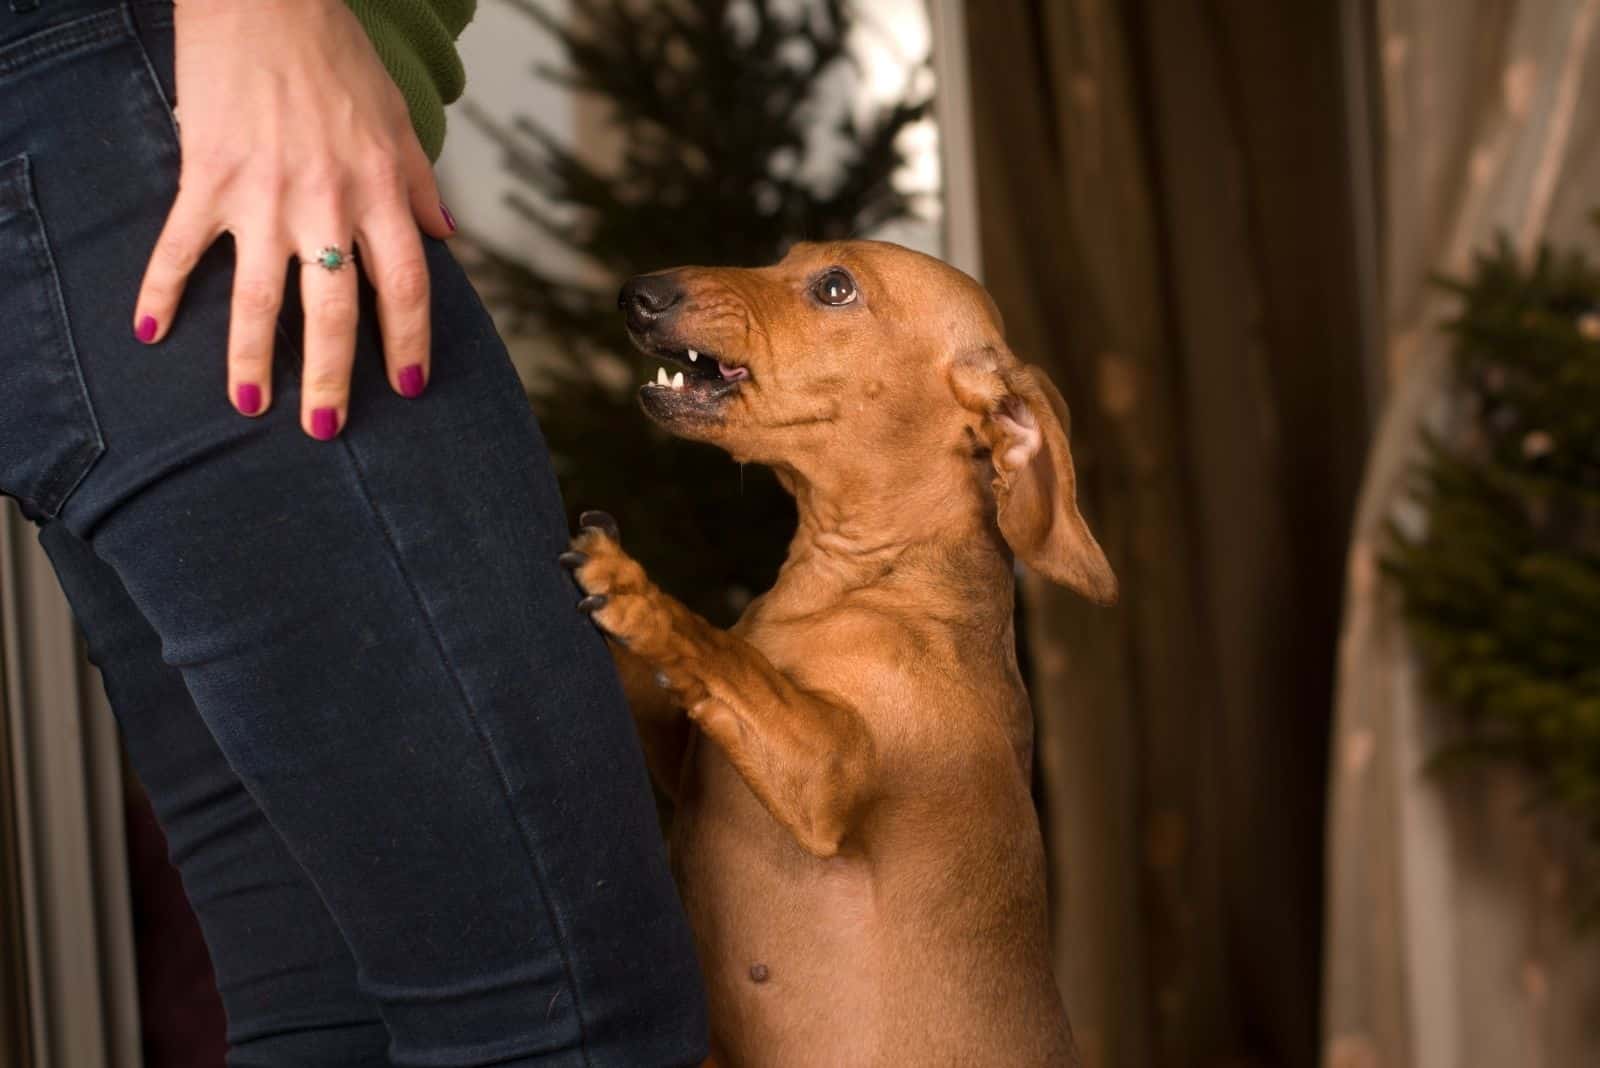 dachshund dog stands leaning on the persons legs while barking